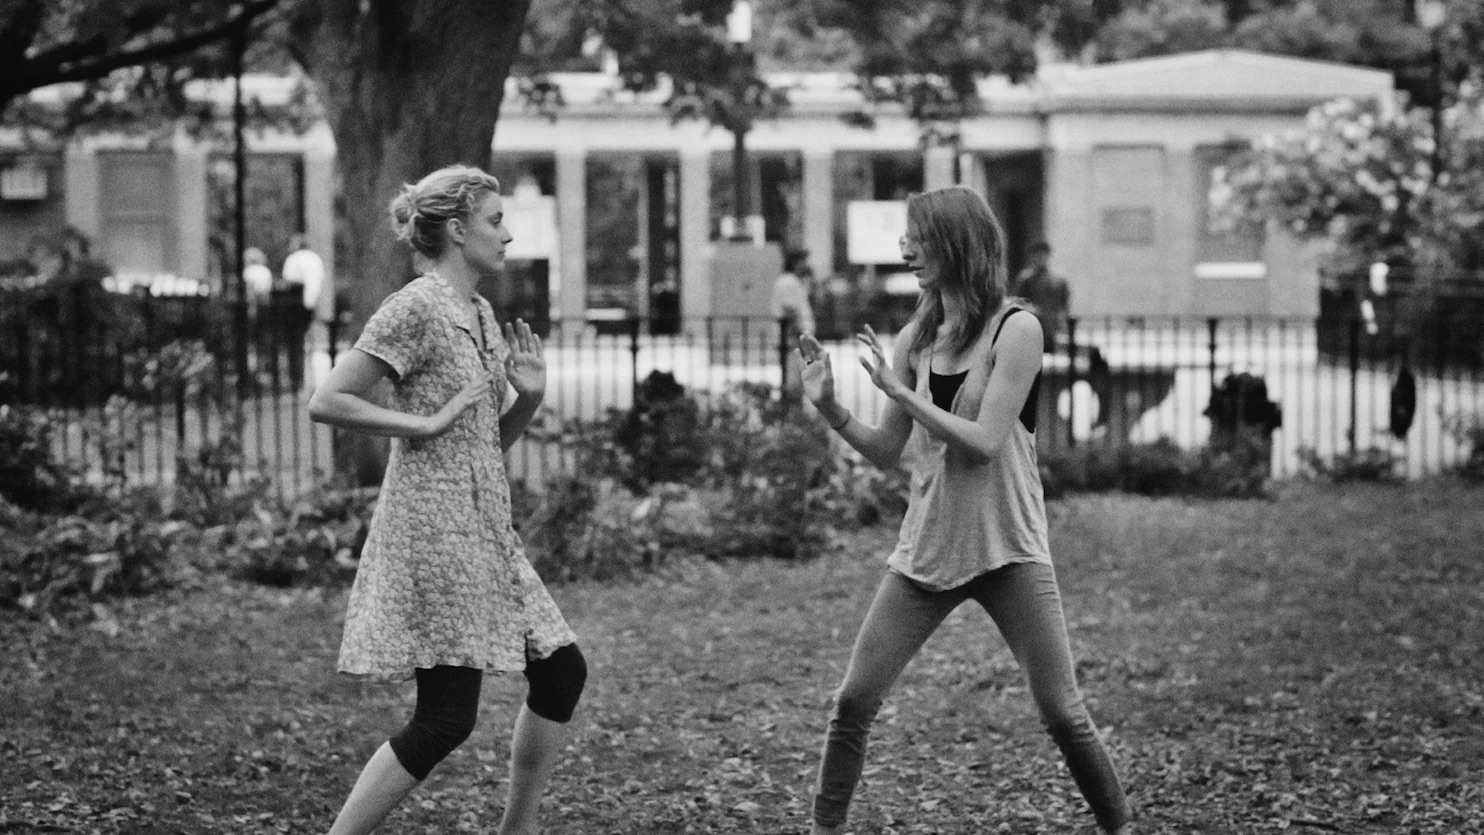 Frances (left) and Sophie (right) “play fighting” in Central Park. Baumbach, Noah, Dir. Frances Ha. 2012.